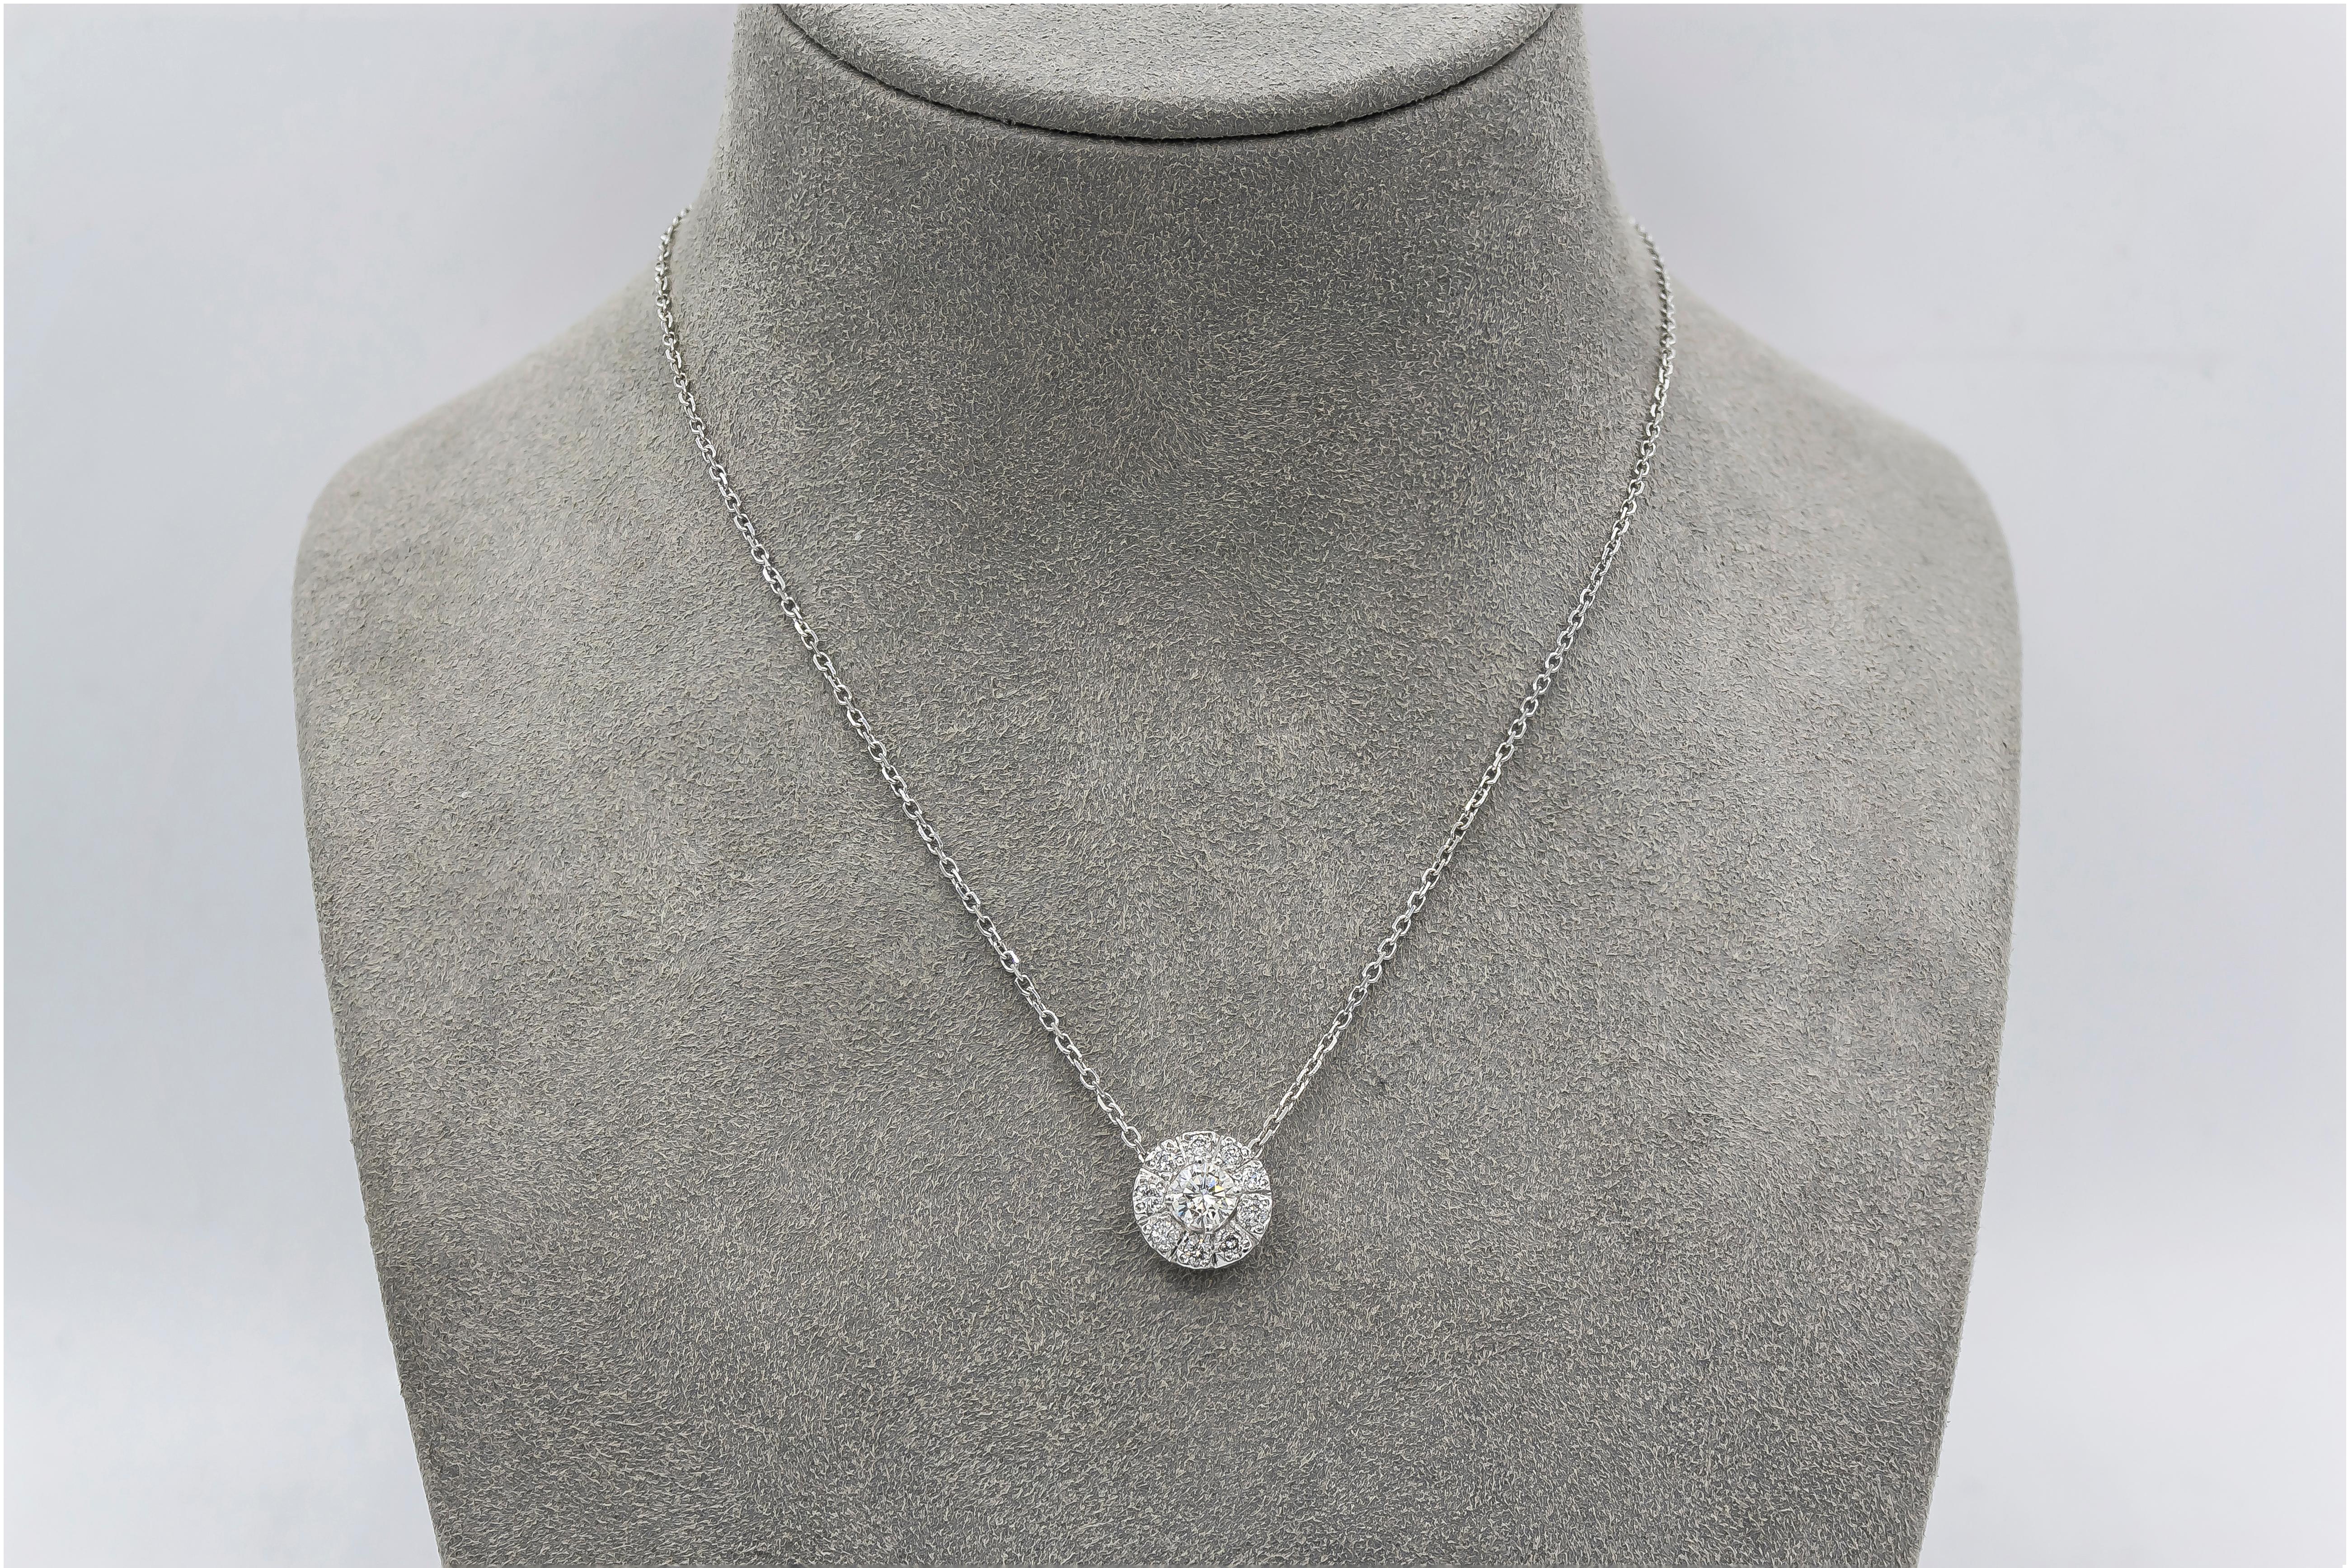 Showcases a brilliant round diamond weighing 0.53 carats, surrounded by a row of round diamonds weighing 0.27 carats total. Set in 14k white gold. Suspended on an 18 inch adjustable white gold chain.

Style available in different price ranges.